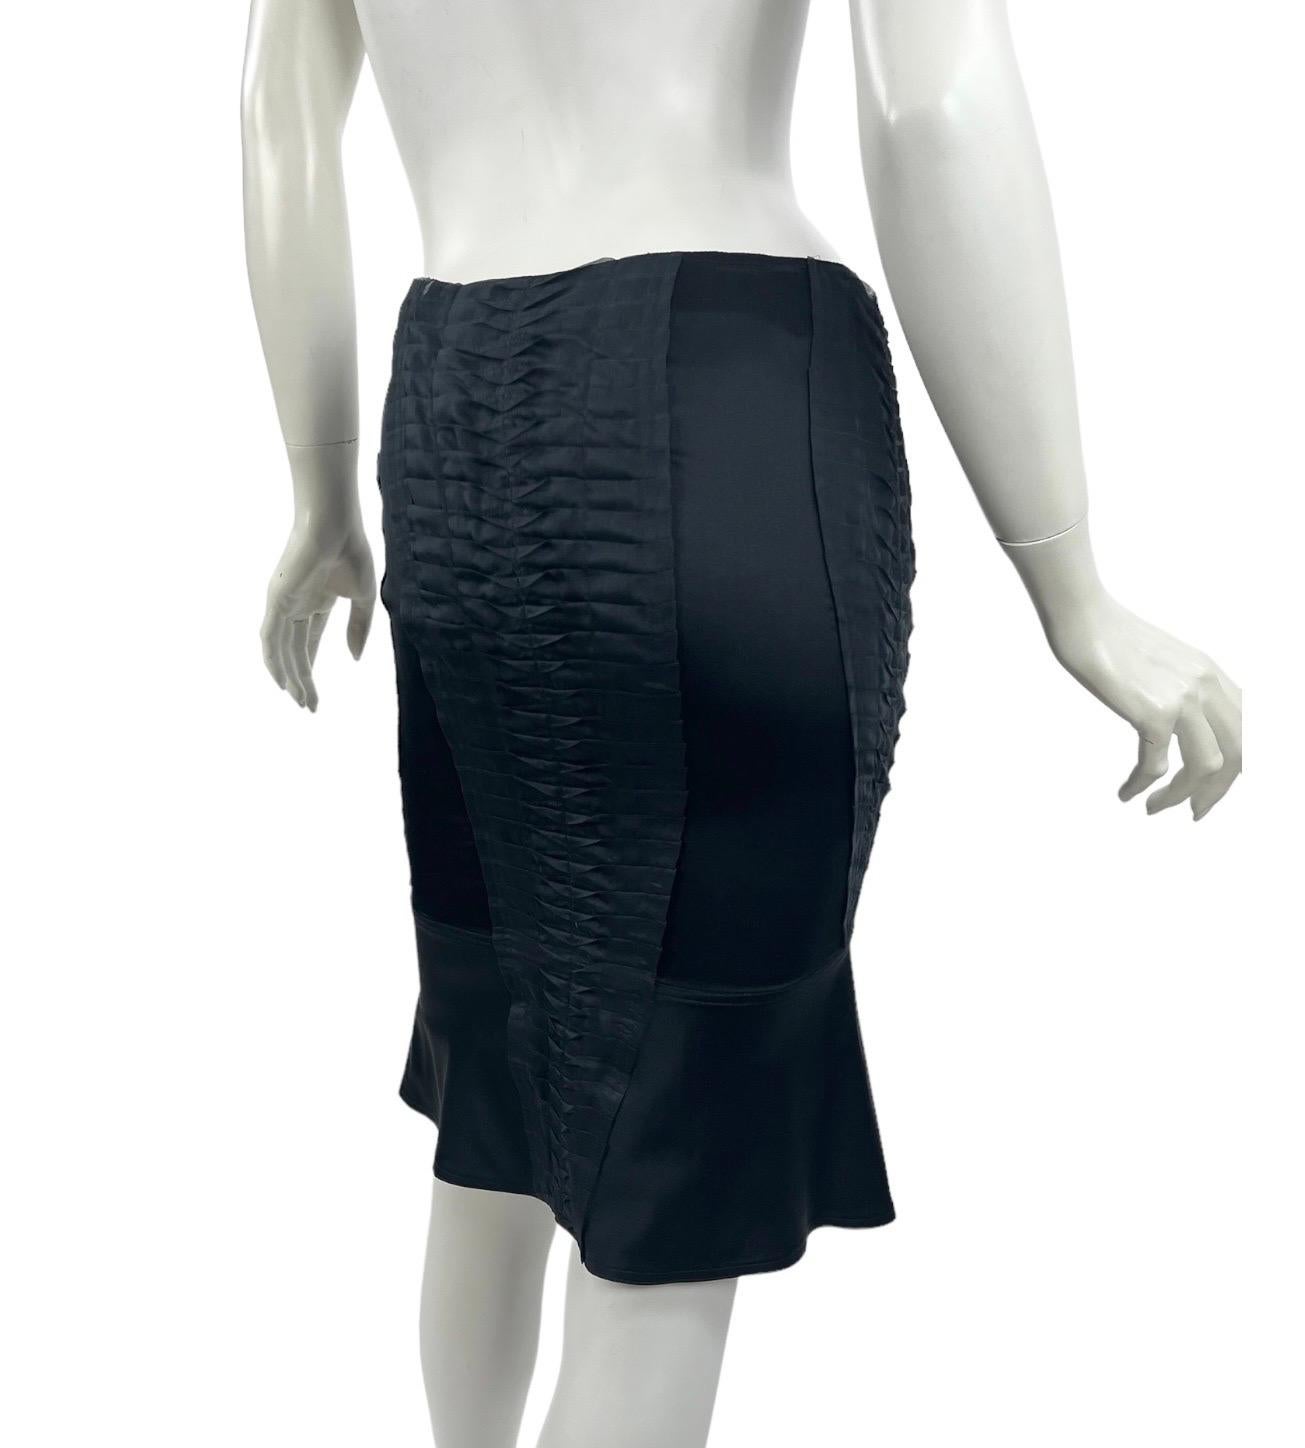 S/S 2004 Vintage Tom Ford for Gucci Runway Black Pleated Silk Skirt Size 40 NWT In New Condition For Sale In Montgomery, TX